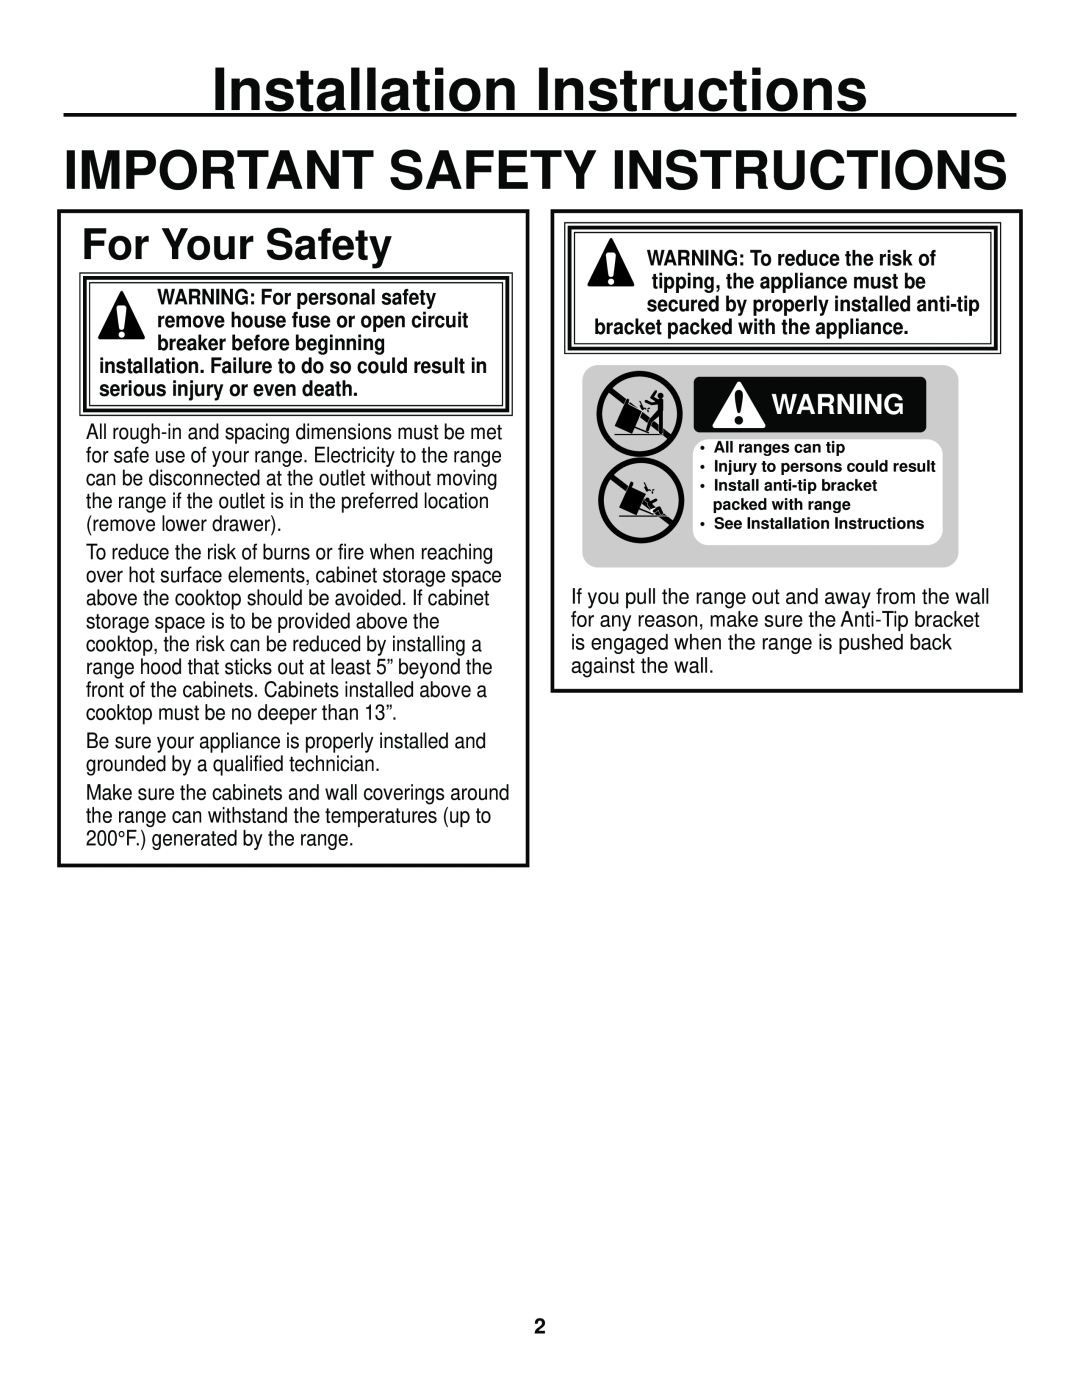 GE 229C4053P447-3 1, 31-10463 Installation Instructions, Important Safety Instructions, For Your Safety 